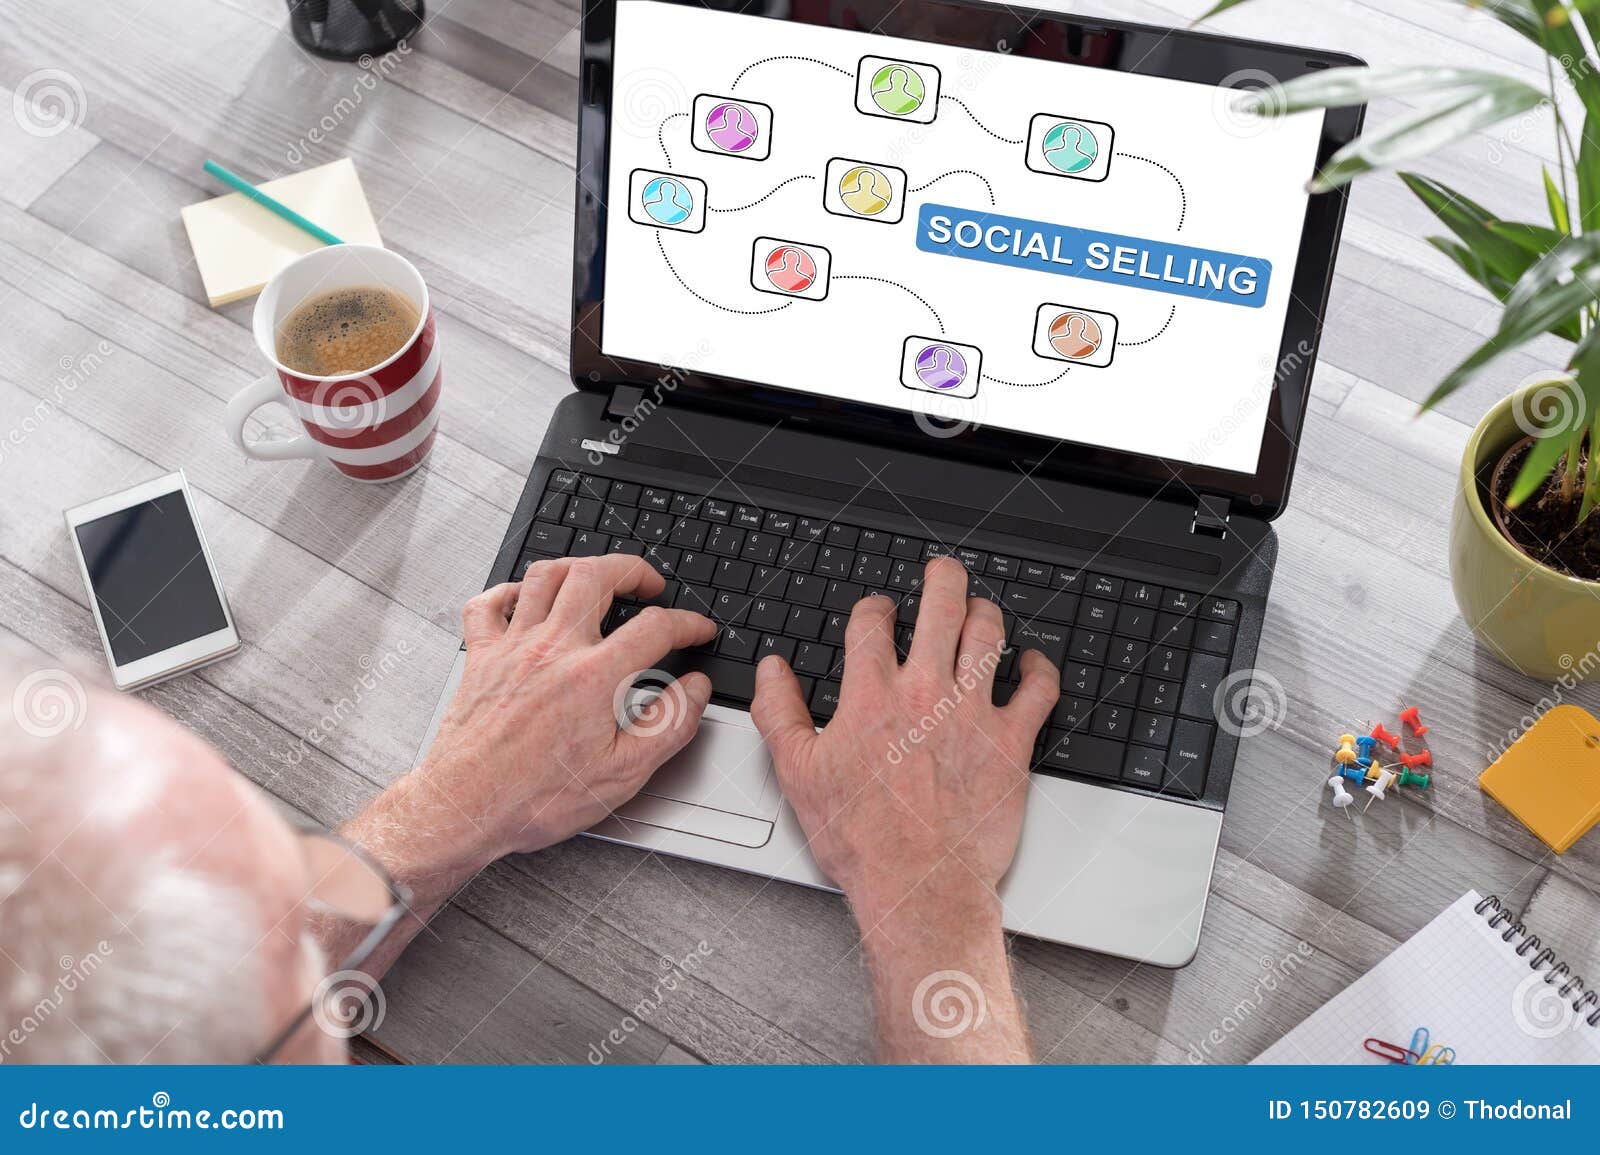 social selling concept on a laptop screen